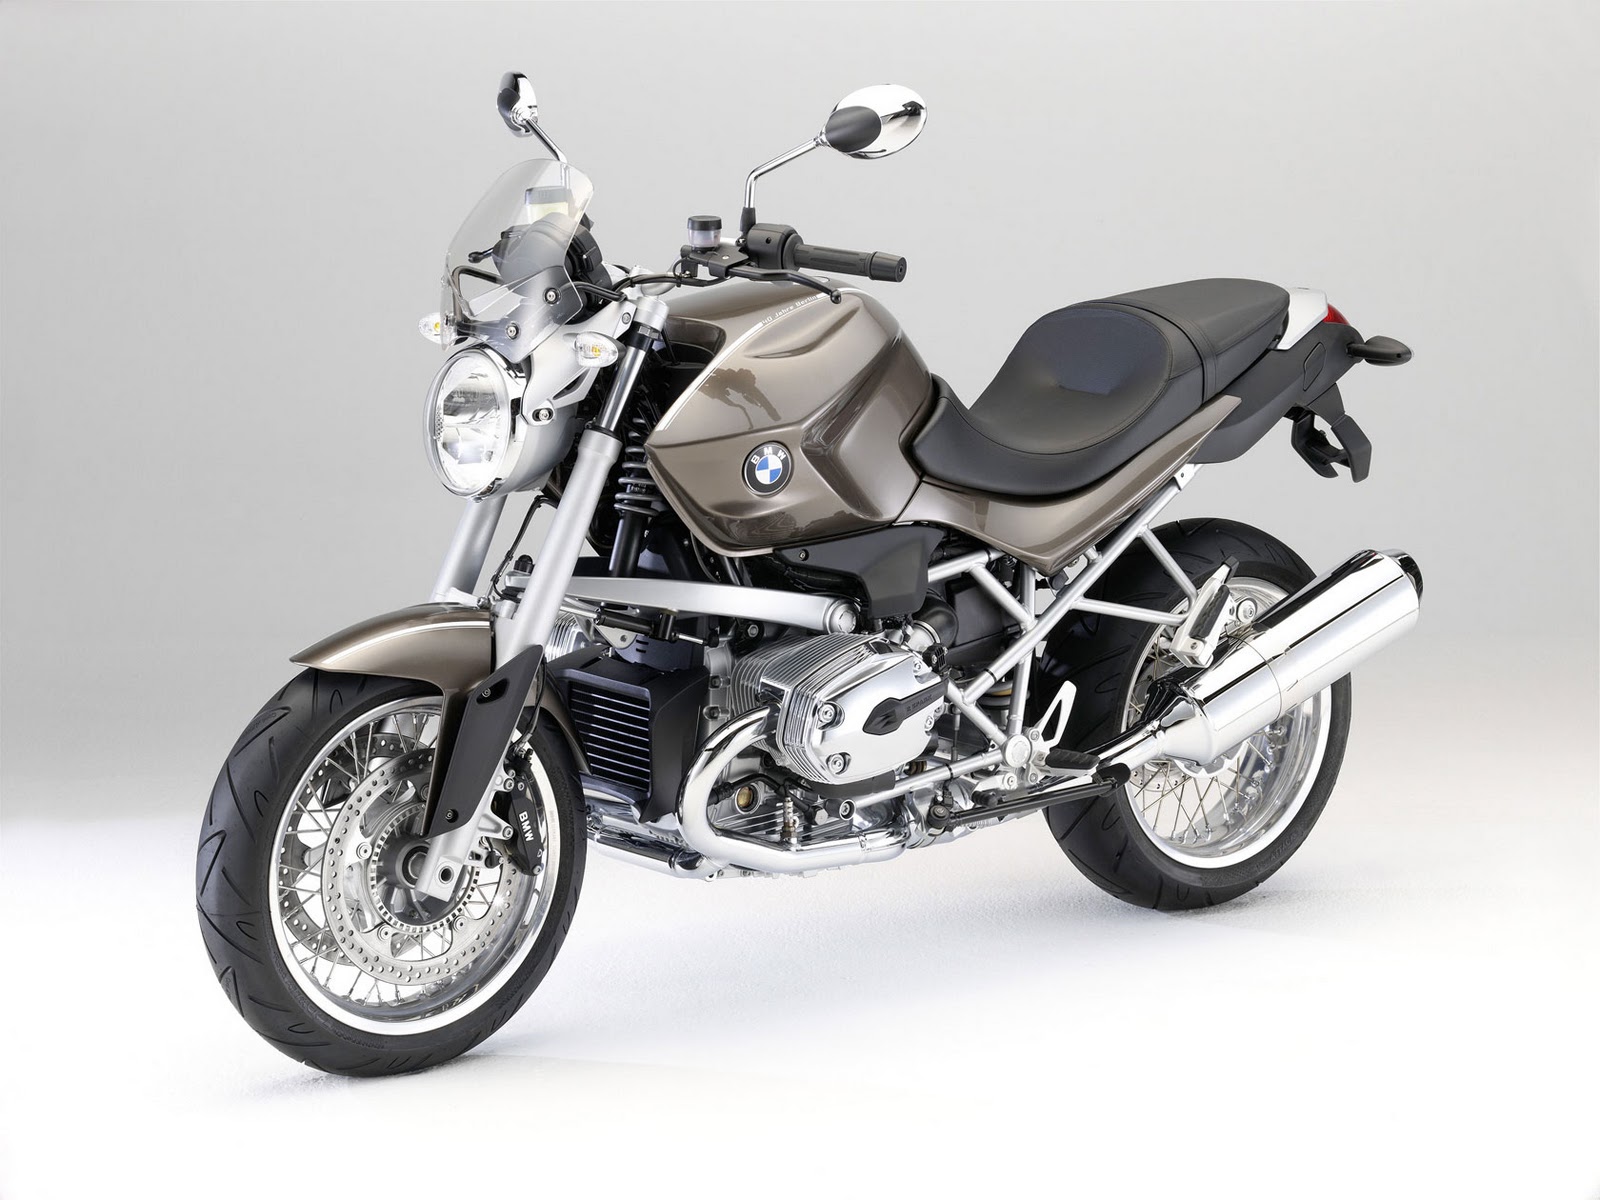 BMW Motorcycle Pictures: BMW R1200R Classic